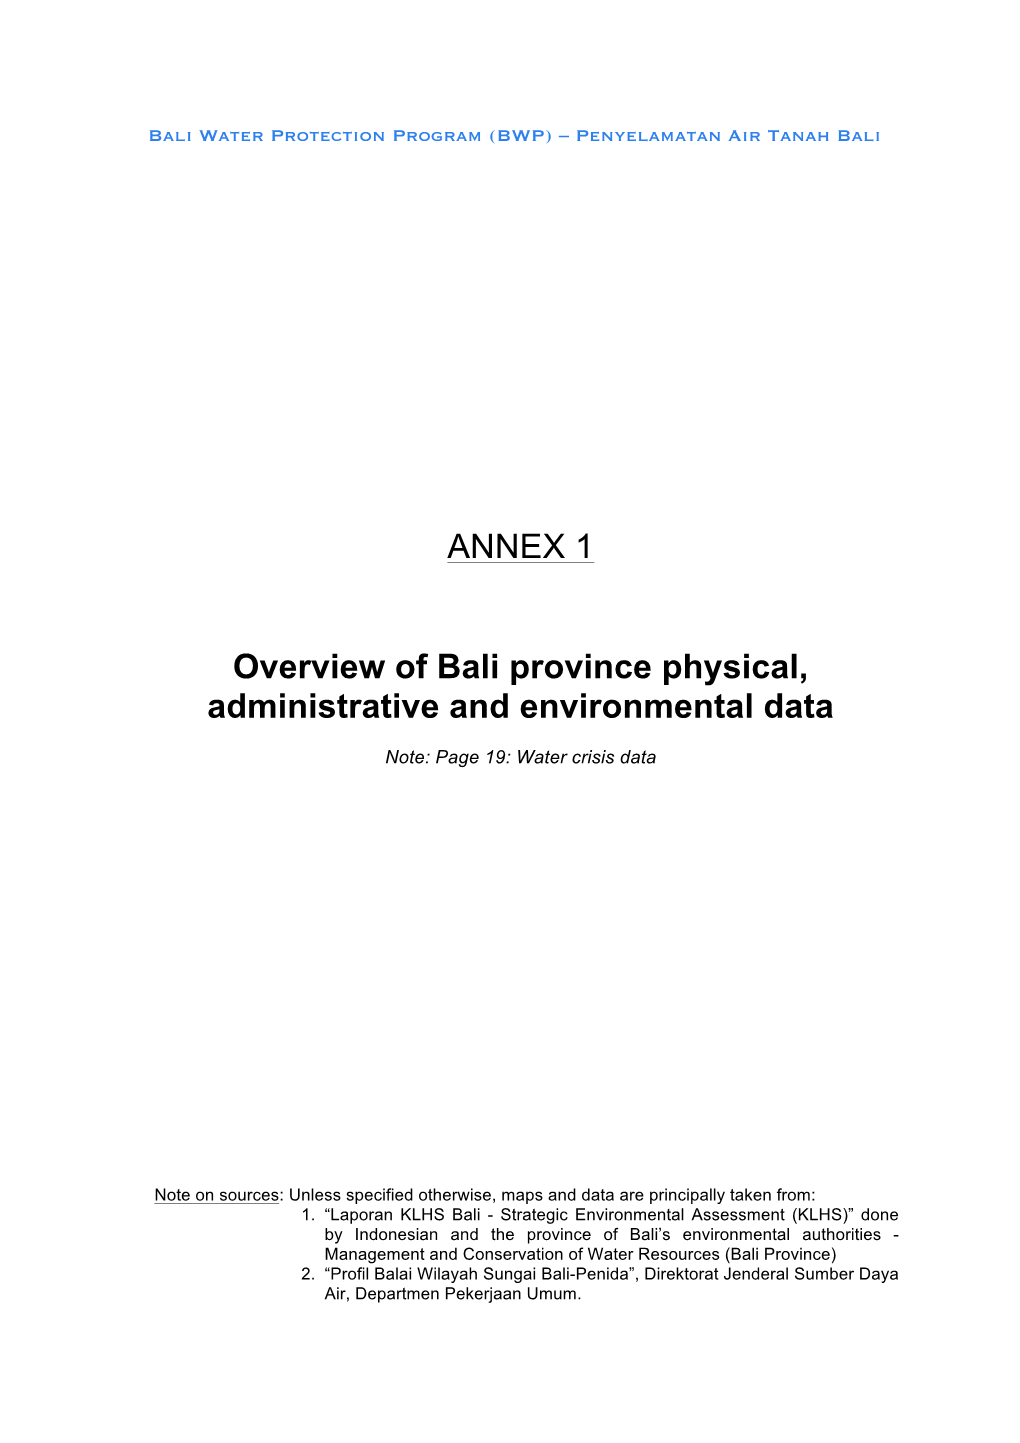 ANNEX 1 Overview of Bali Province Physical, Administrative And